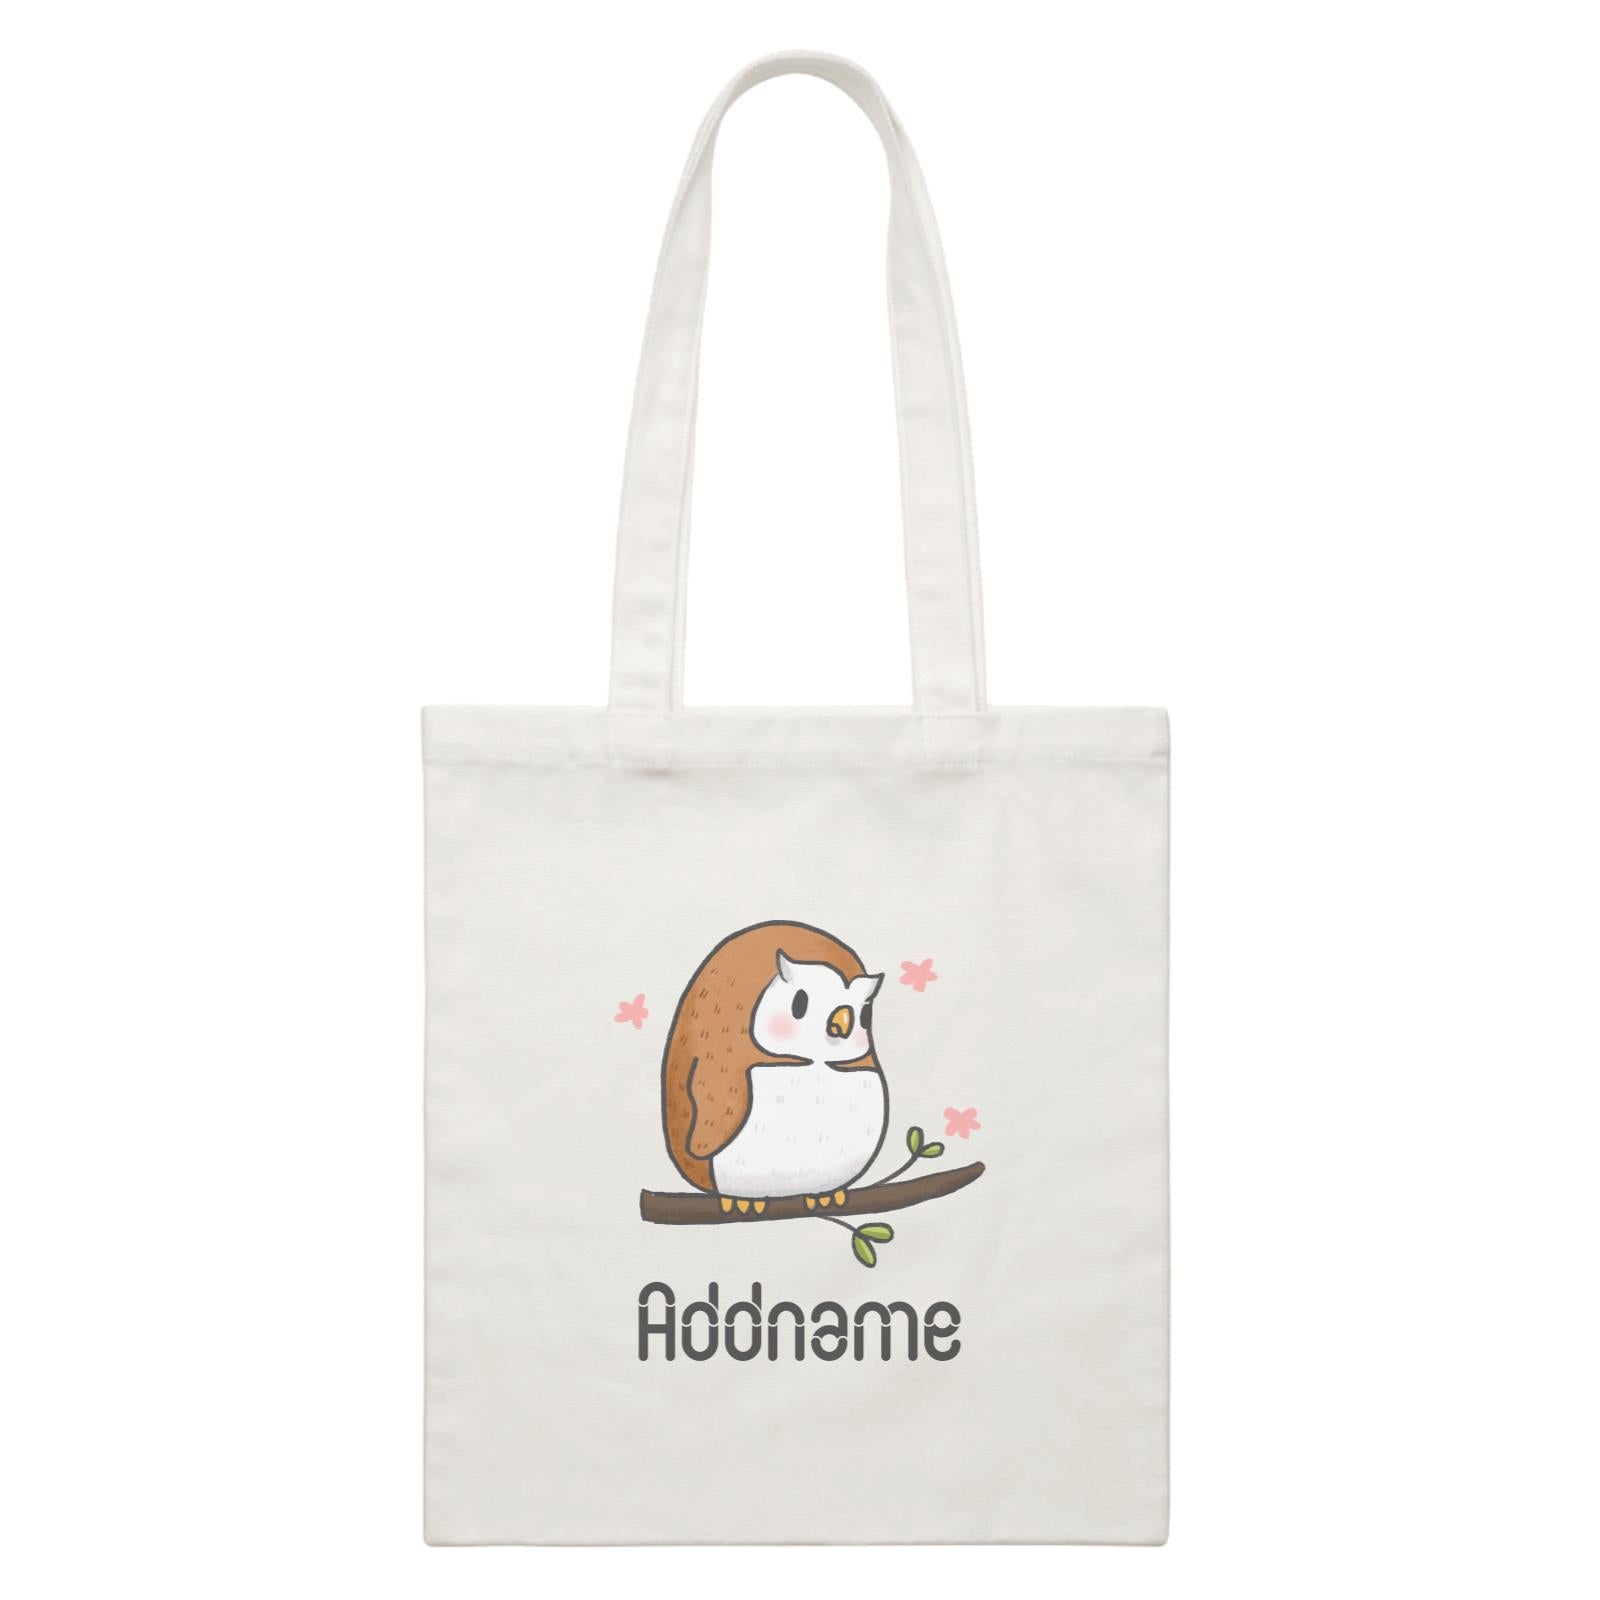 Cute Hand Drawn Style Owl Addname White Canvas Bag